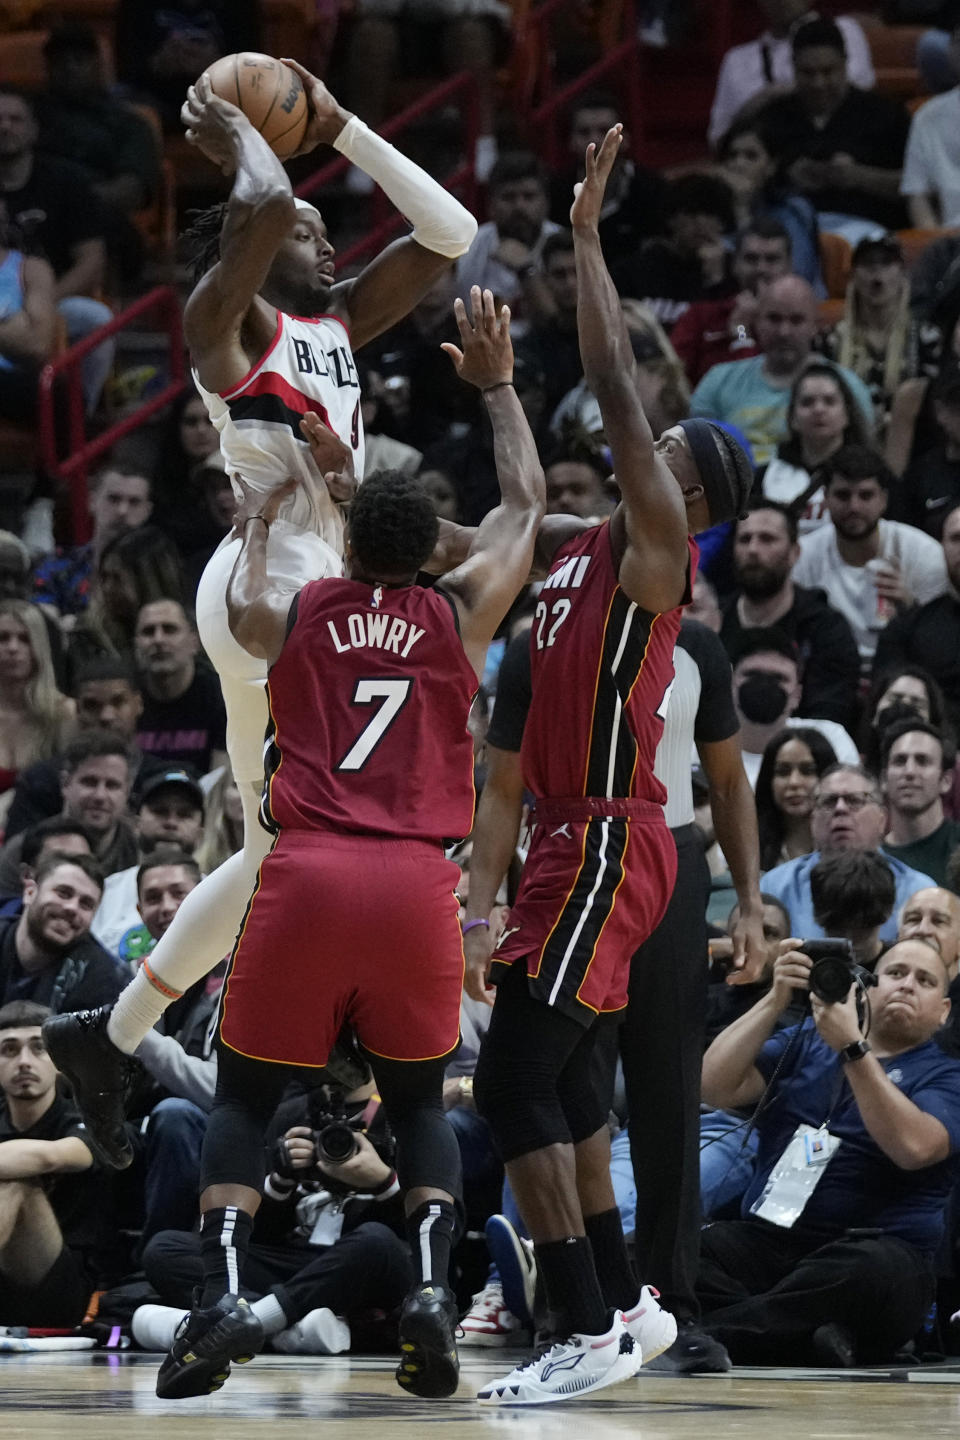 Portland Trail Blazers forward Jerami Grant (9) takes a shot against Miami Heat forward Jimmy Butler (22) and guard Kyle Lowry (7) during the second half of an NBA basketball game, Monday, Nov. 7, 2022, in Miami. (AP Photo/Wilfredo Lee)